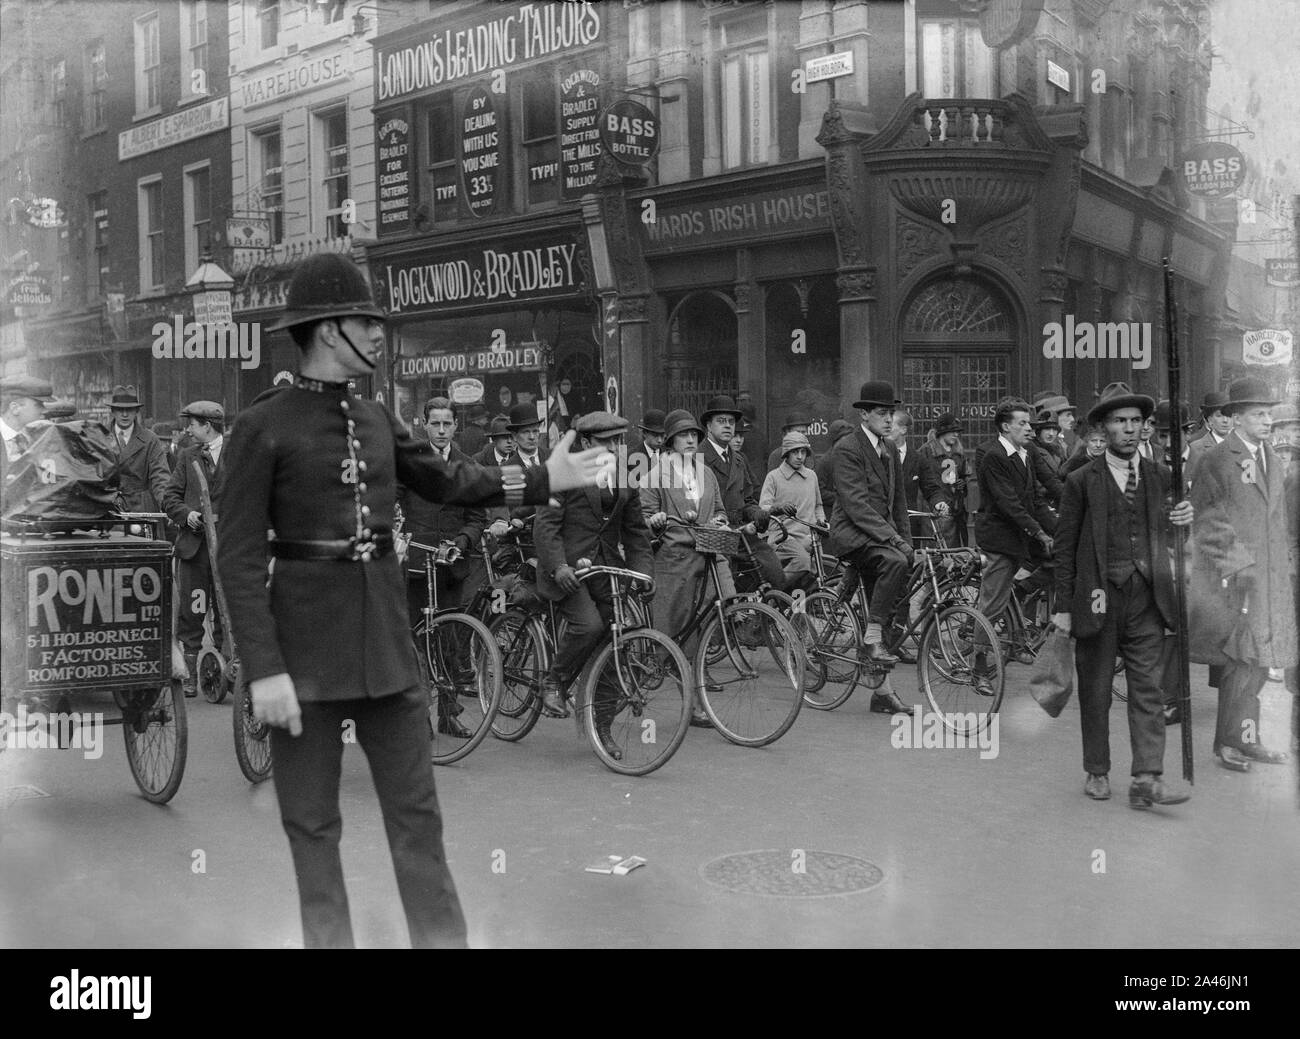 4th May 1926. High Holborn, London, England. A Policeman directs traffic, cyclists, and pedestrians, as the General Strike in the United Kingdom begins. Soon, the streets would see British Army tanks and armoured cars, as troops helped to m agnation order keep basic services running. Stock Photo